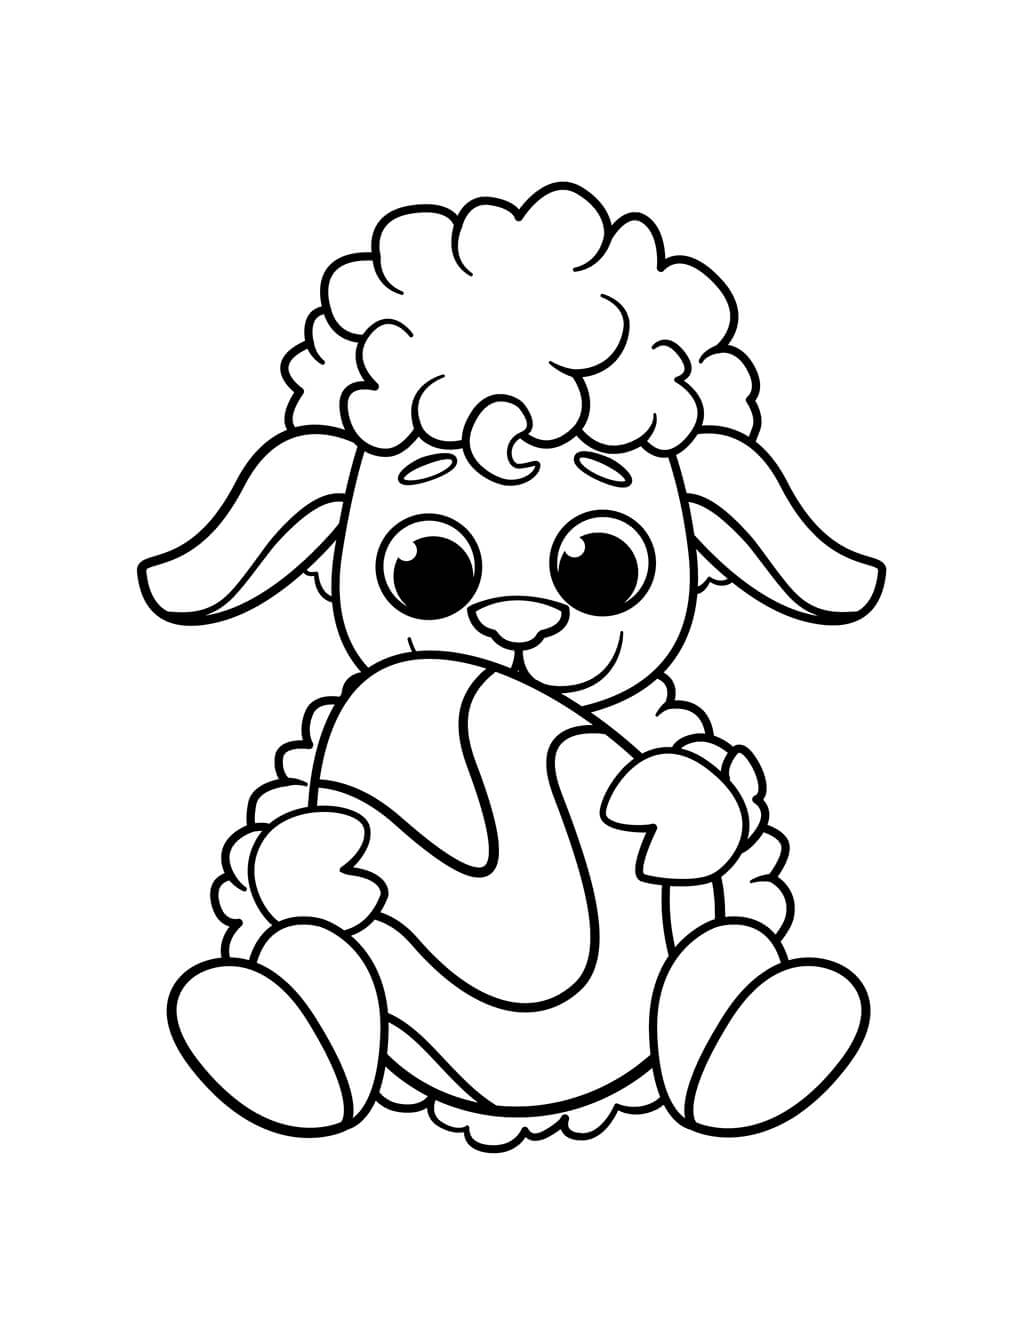 Easter Coloring Book for Toddlers: Coloring Book for Kids Ages 2-4